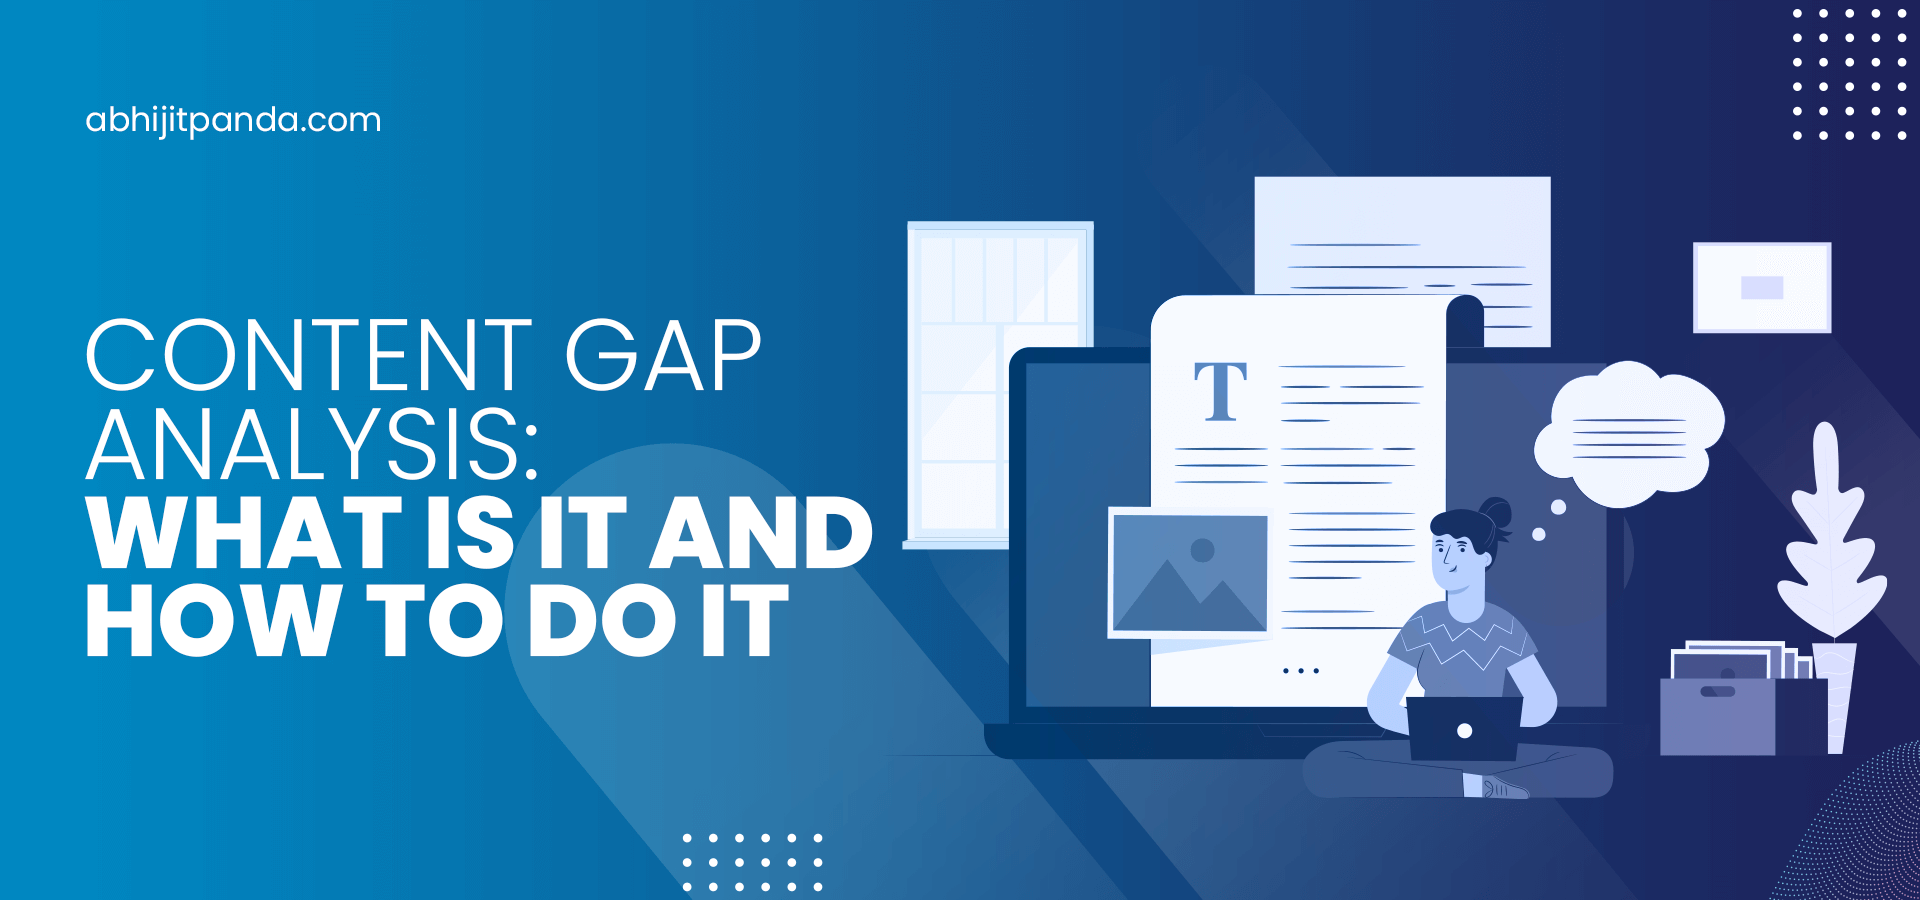 Content Gap Analysis - What is it and How to do it